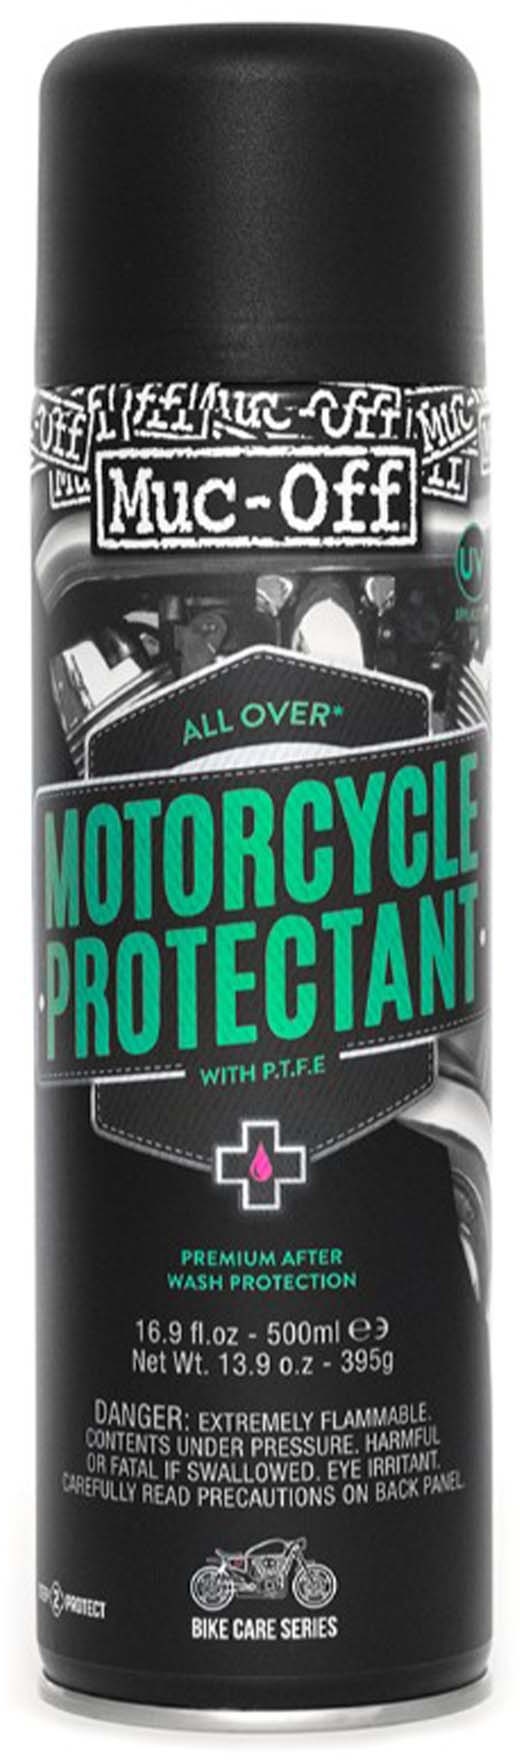 Muc Off Bike/Motorcycle Protectant 500ml